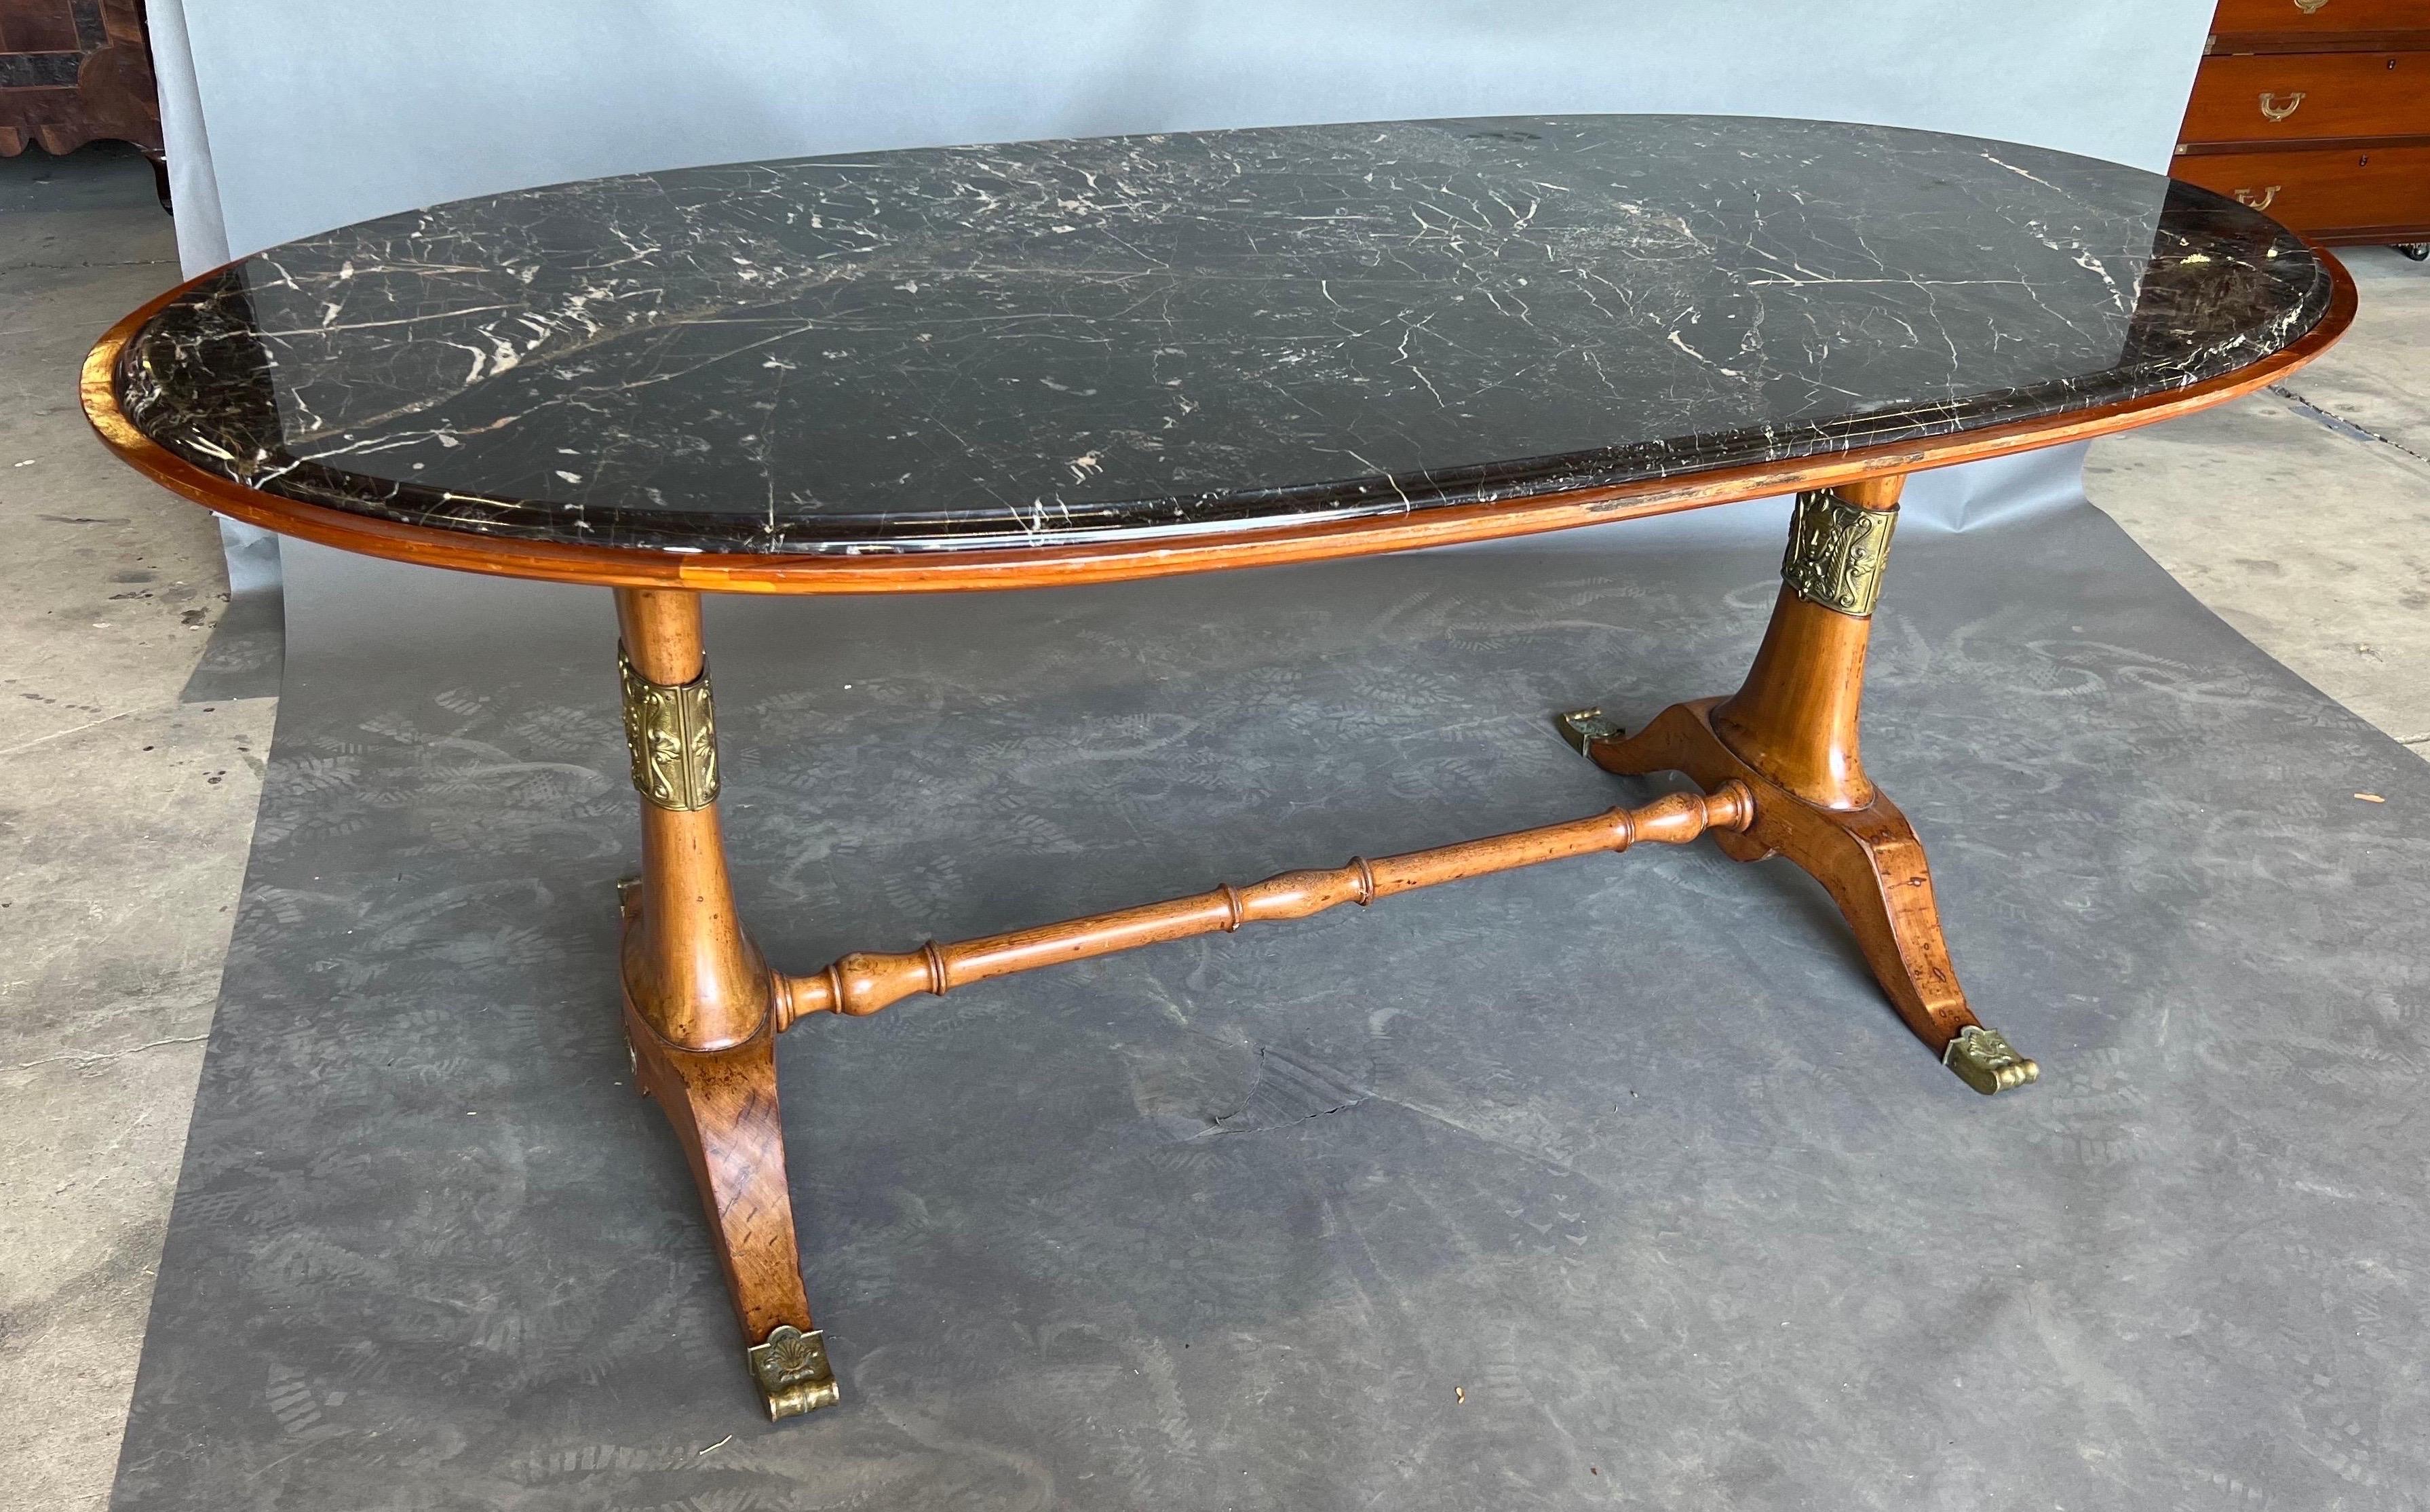 Exceptional art deco period dining or center table. Walnut with bronze tipped feet and decorative appliqués with original black marble top. Would work just as well in a contemporary setting as a room filled with antiques. 

Complimentary shipping